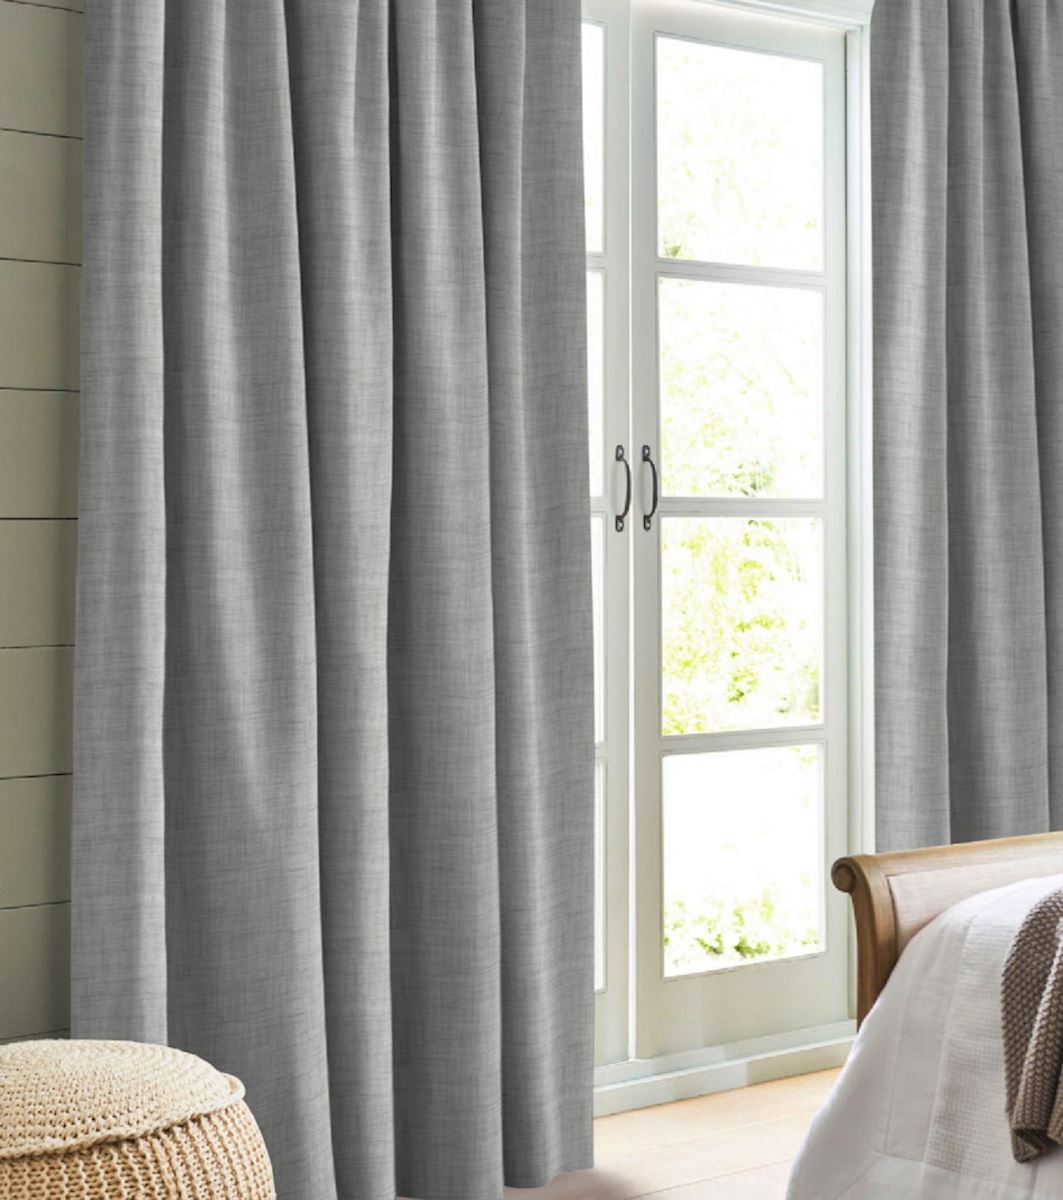 Blackout curtain gray turquoise